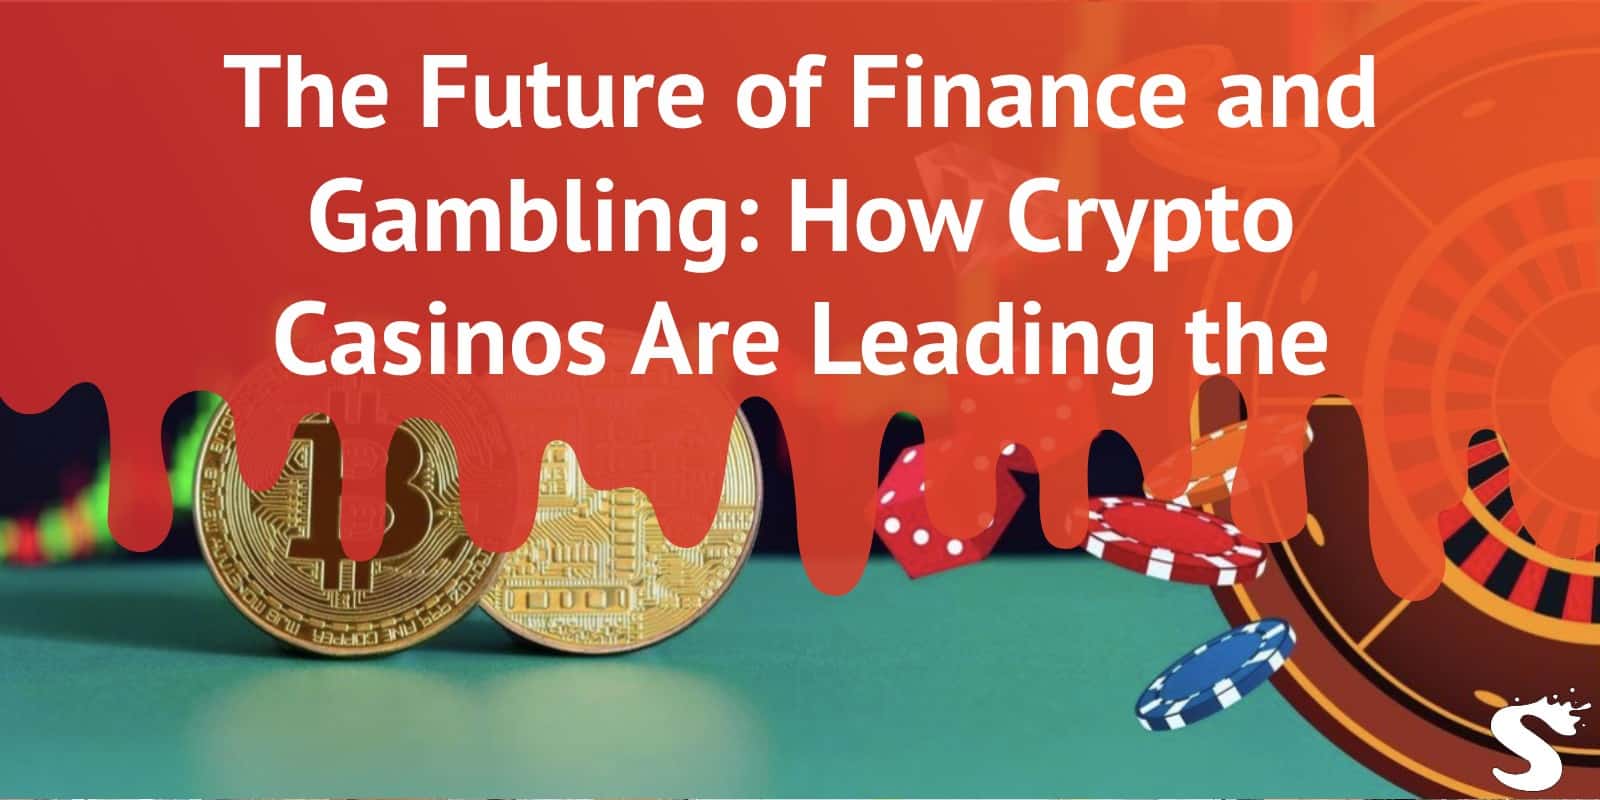 The Future of Finance and Gambling: How Crypto Casinos Are Leading the Way